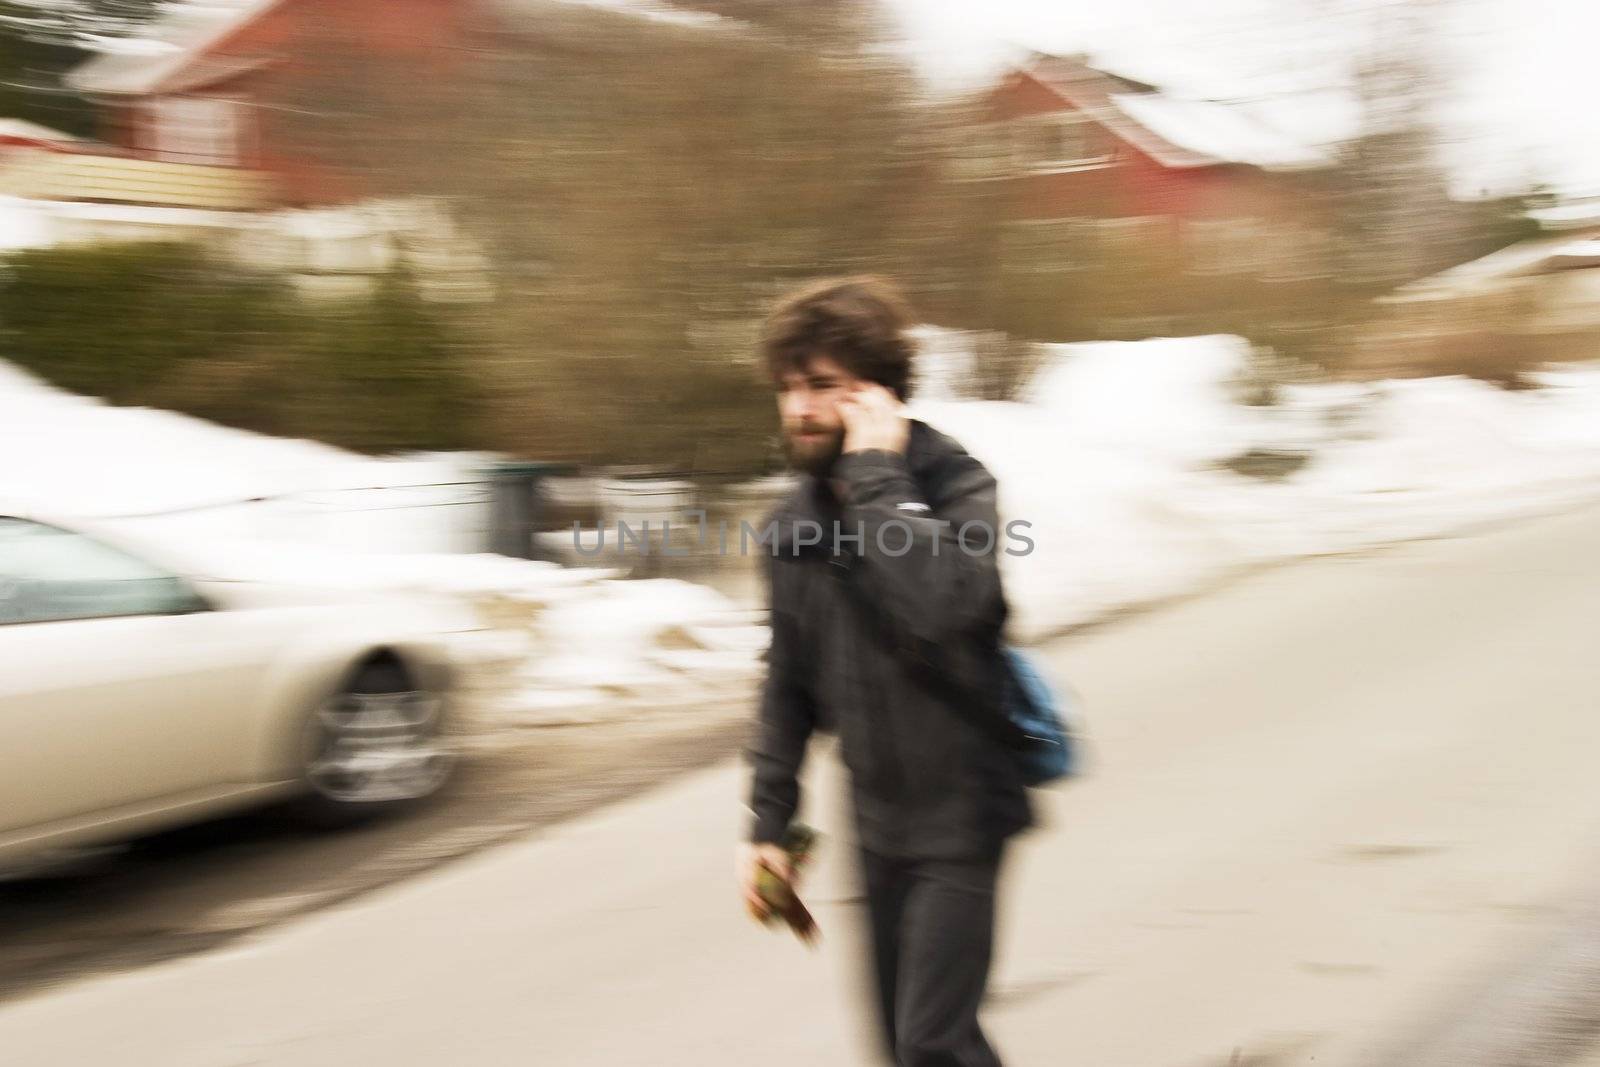 A motion blur abstract of a person walking in a hurry talking on a cell phone, a late rushing concept image.